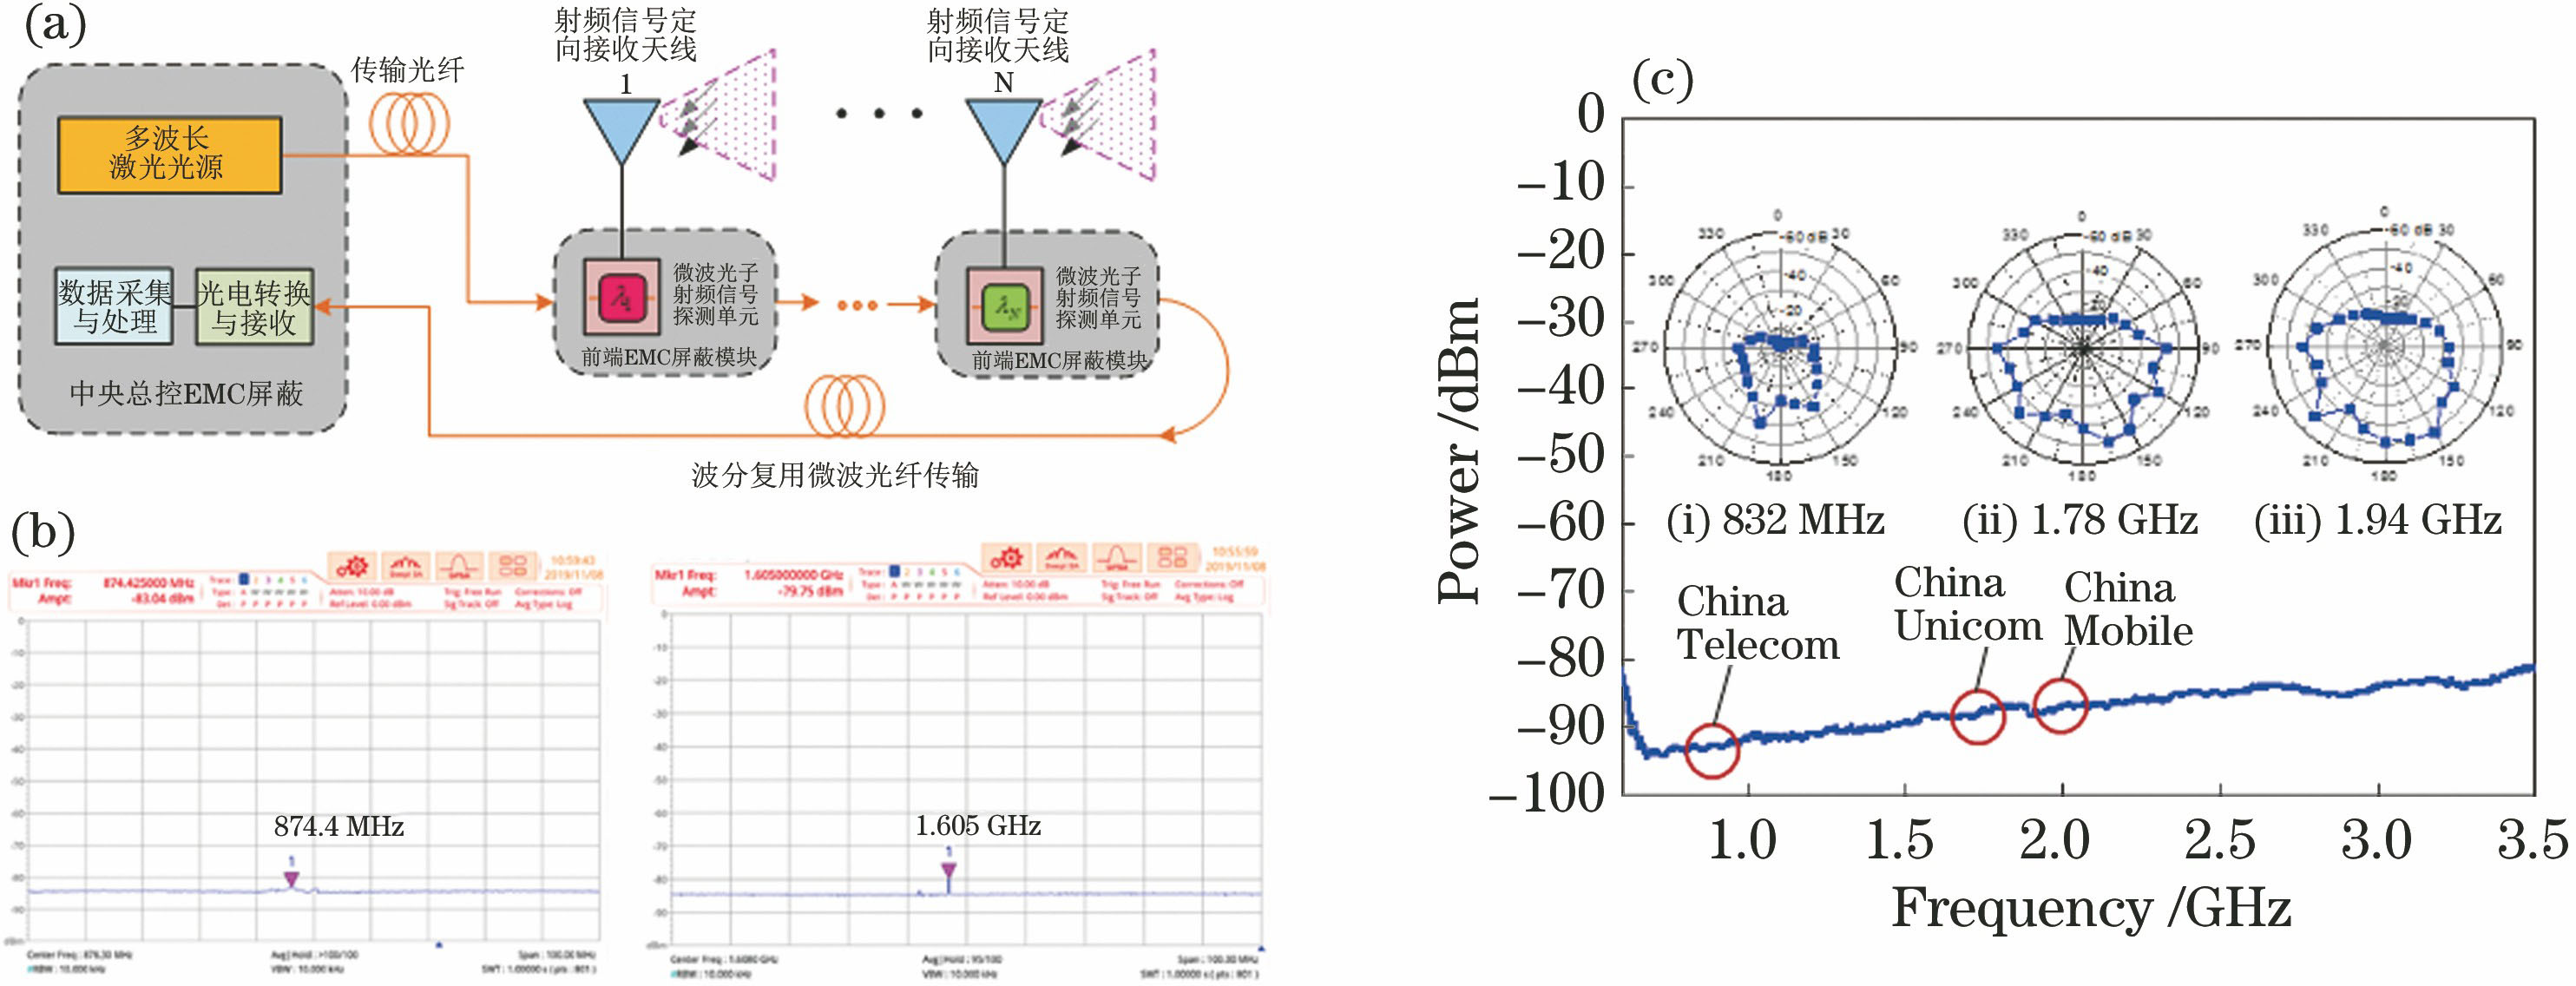 (a) Diagram of microwave photonic RF signal monitoring system; (b) RF signal measurement spectrum of Datangzhai in FAST area; (c) sensitivity and direction detection results obtained by microwave photonic RF signal monitoring